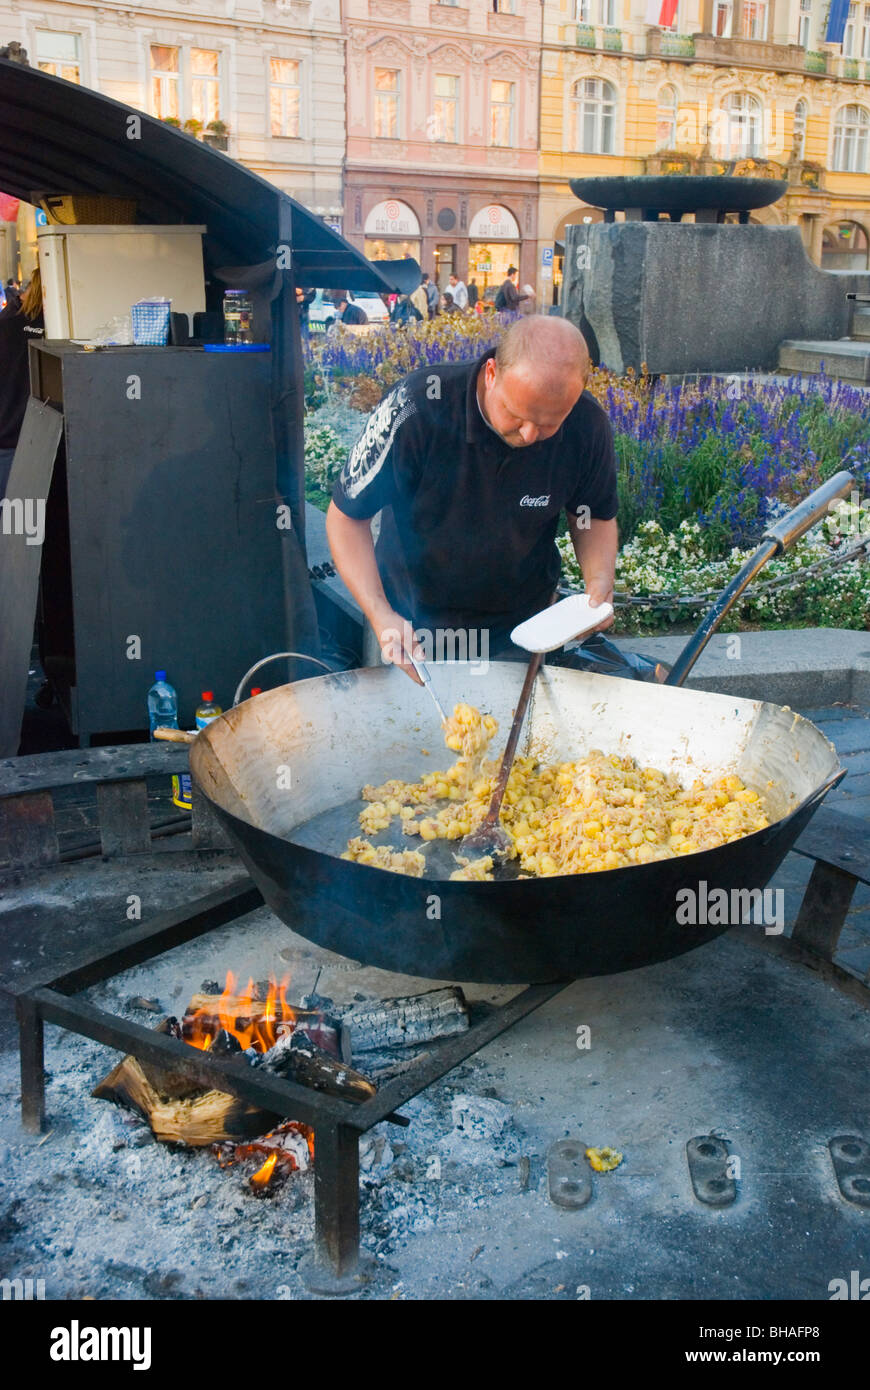 https://c8.alamy.com/comp/BHAFP8/food-cooked-in-a-giant-wok-pan-at-old-town-square-in-prague-czech-BHAFP8.jpg